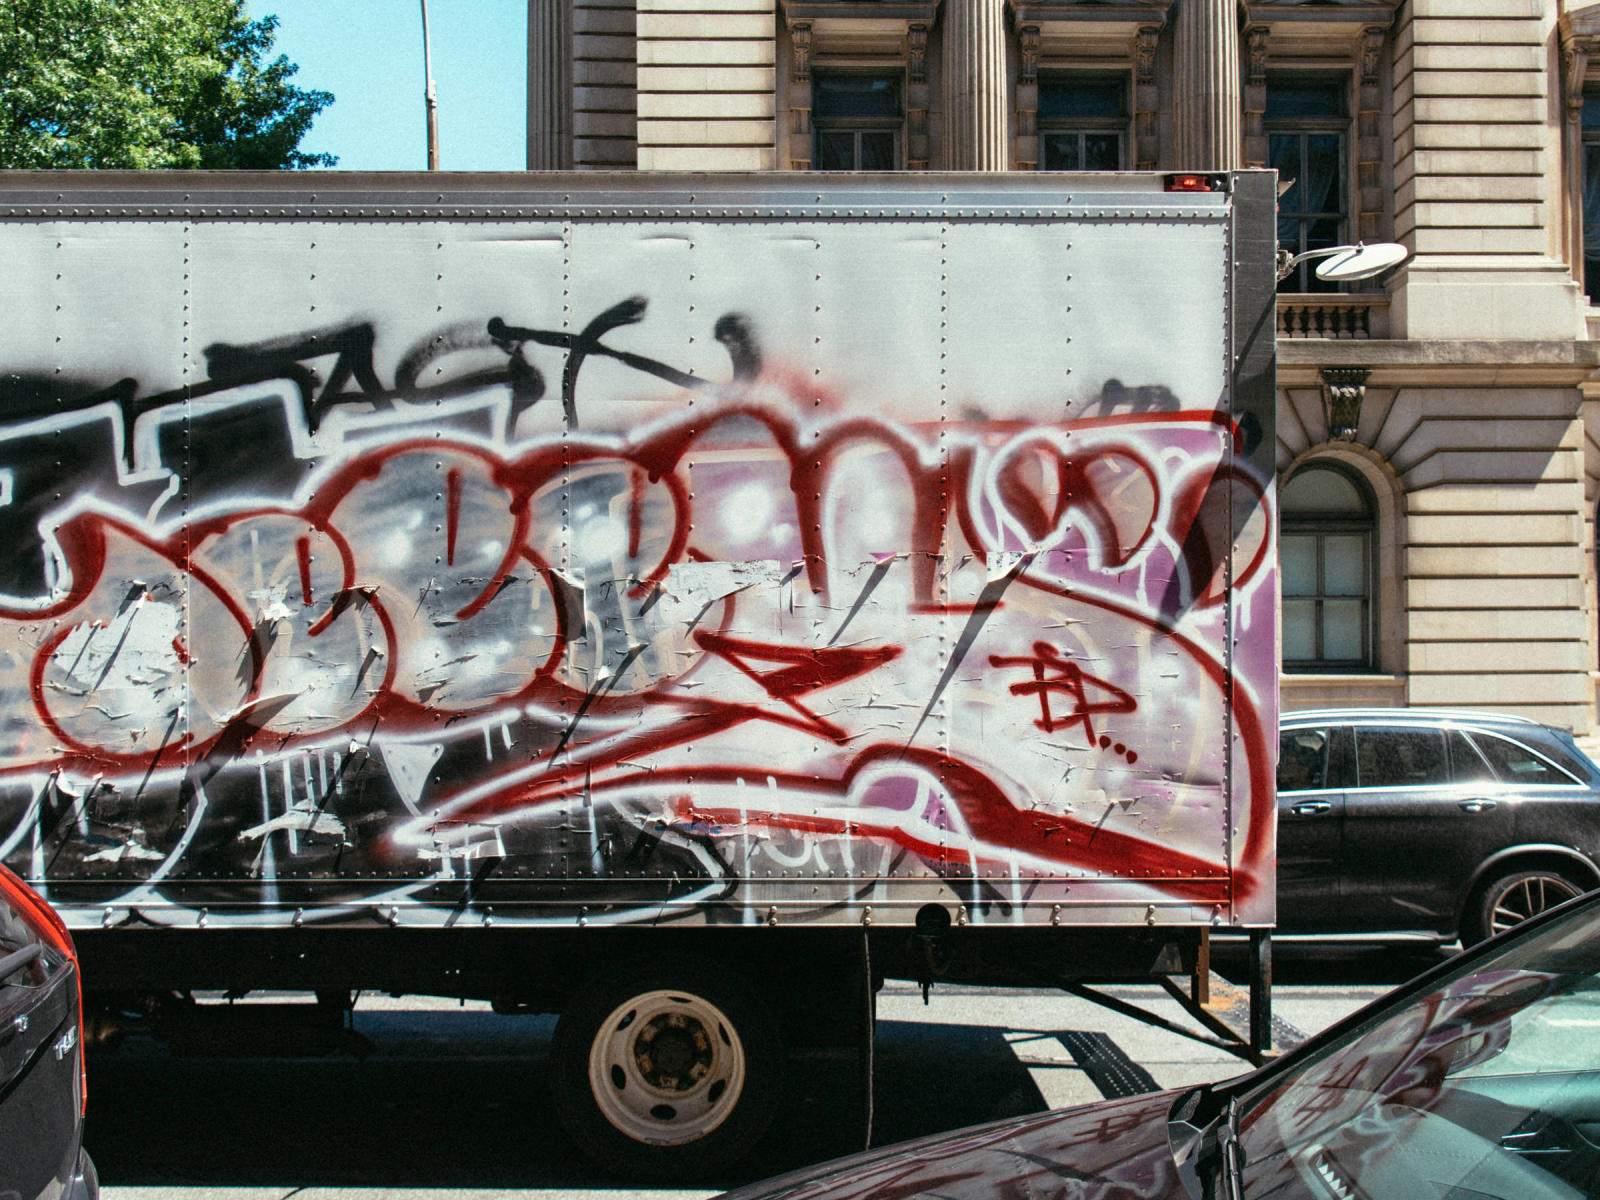 Artistic truck with graffiti painted on it